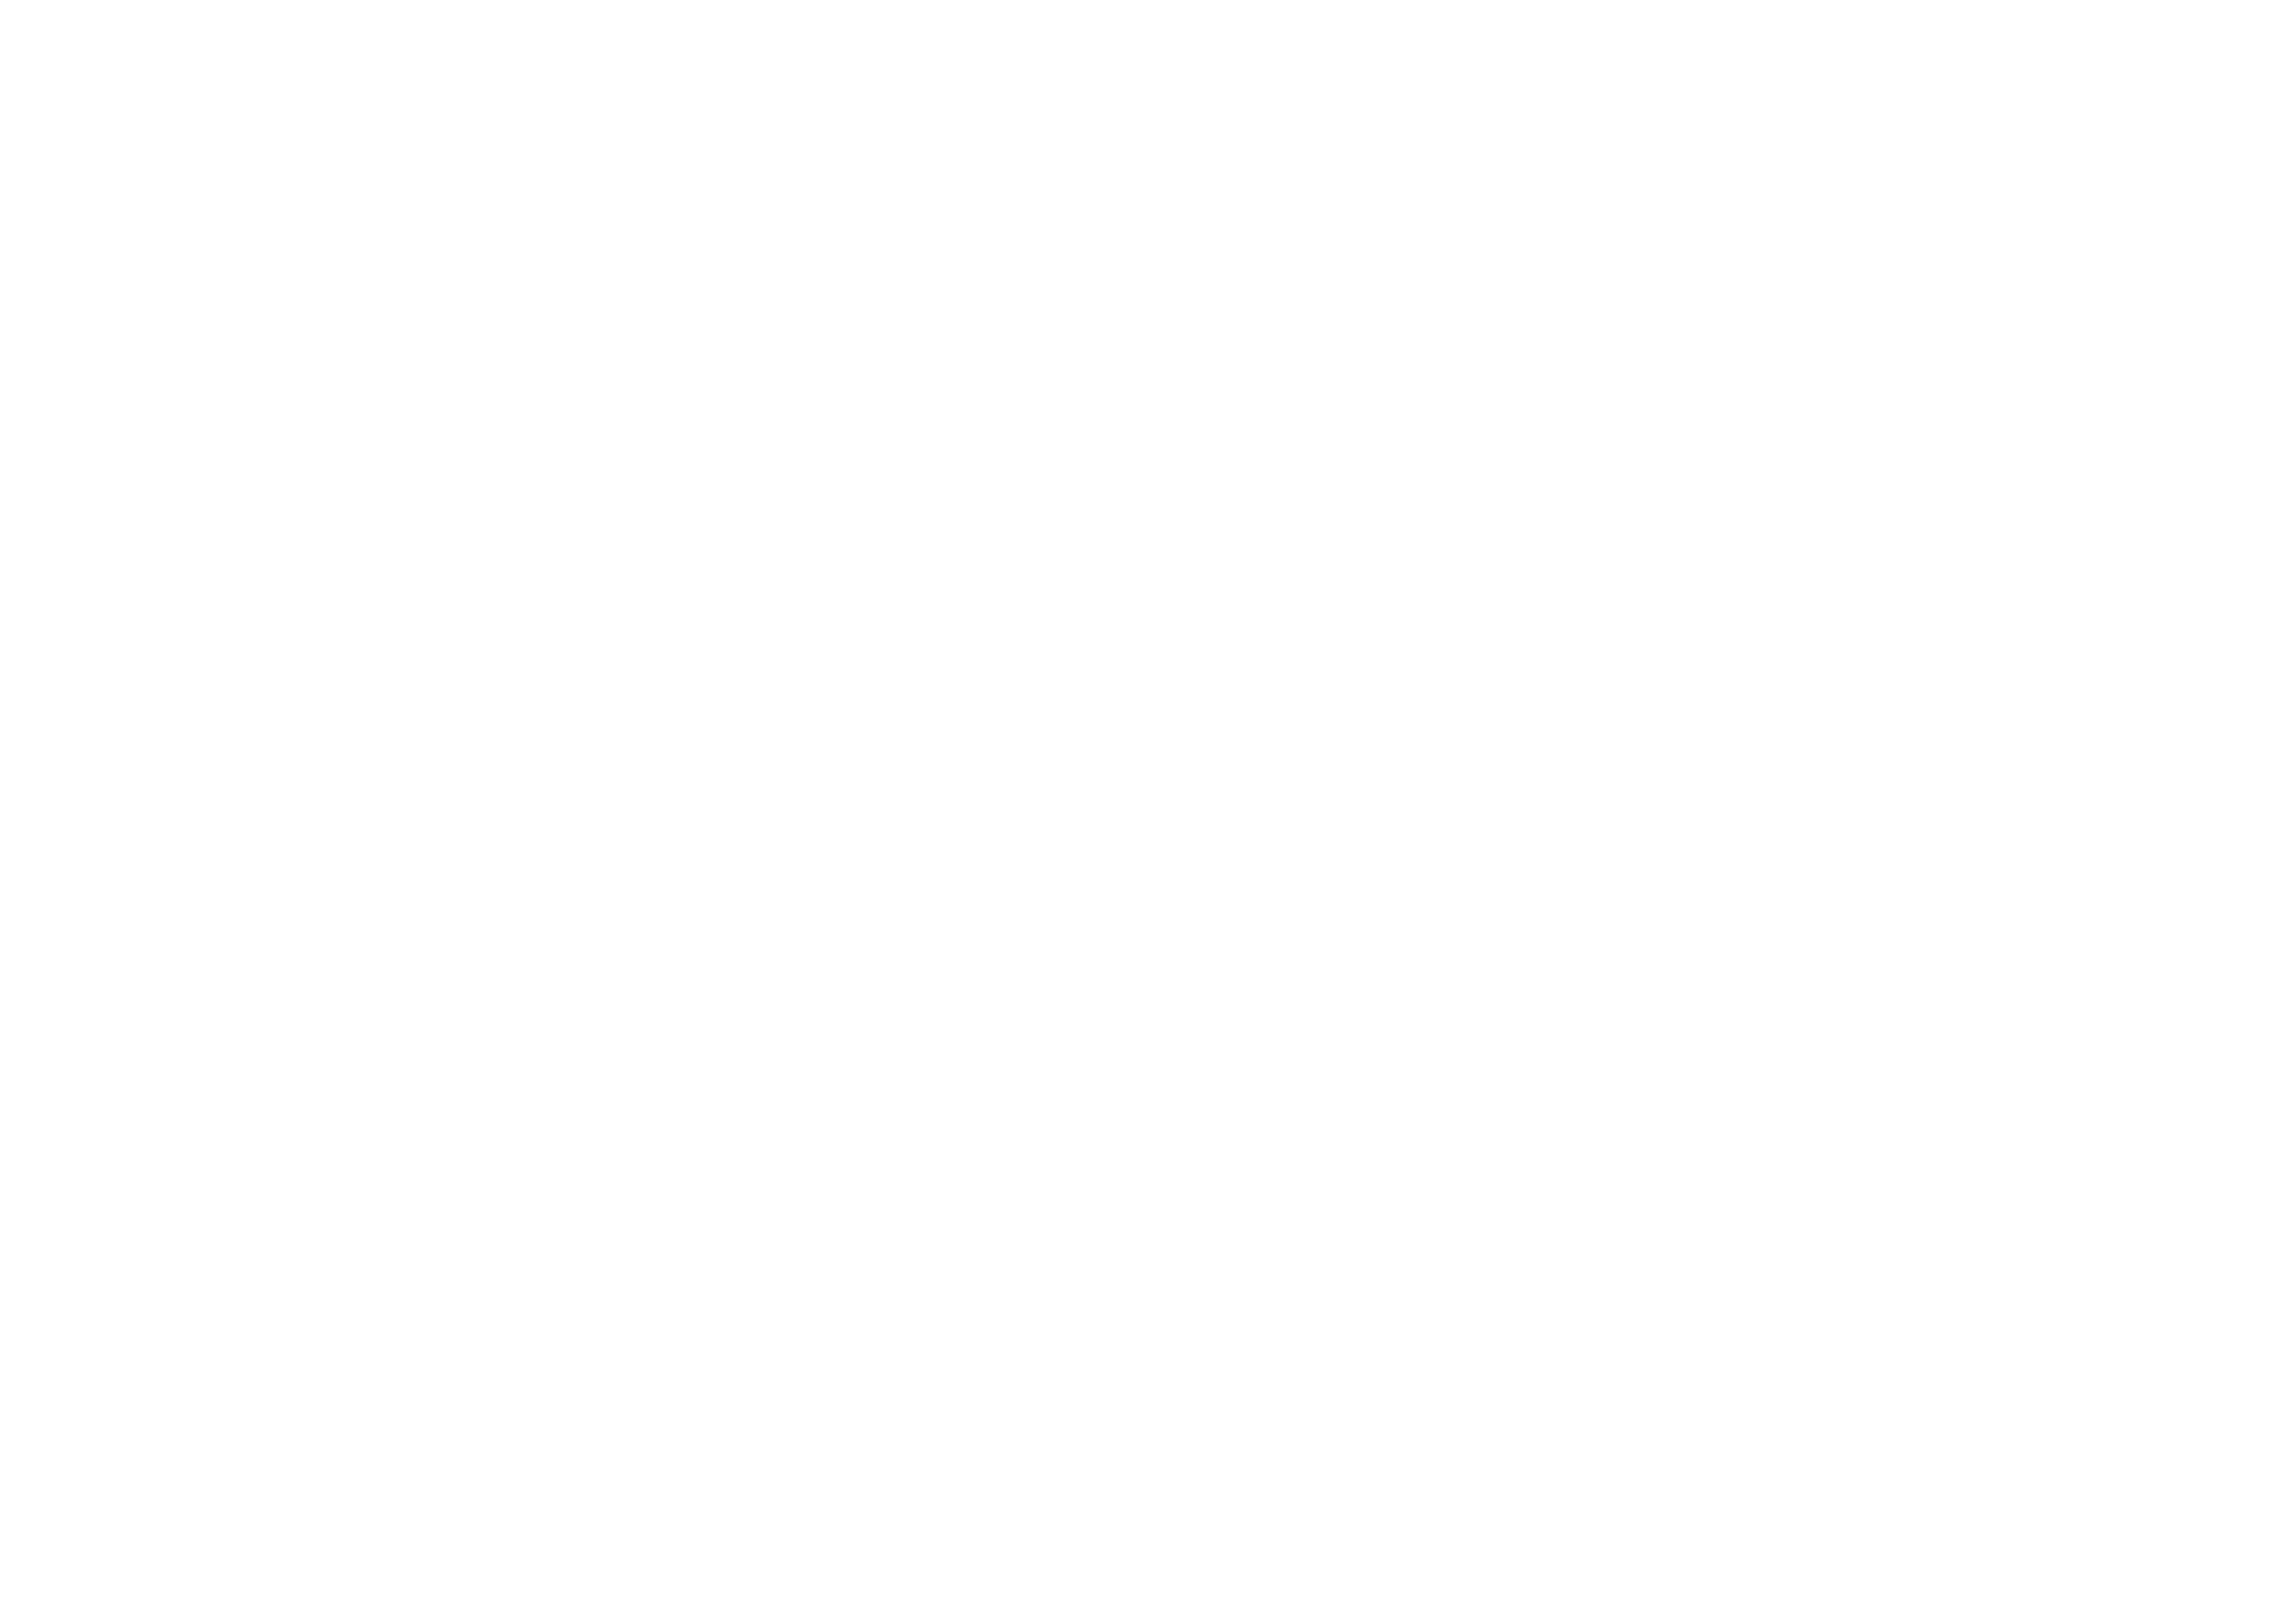 Easybet Review Sportsbook & Casino in South Africa